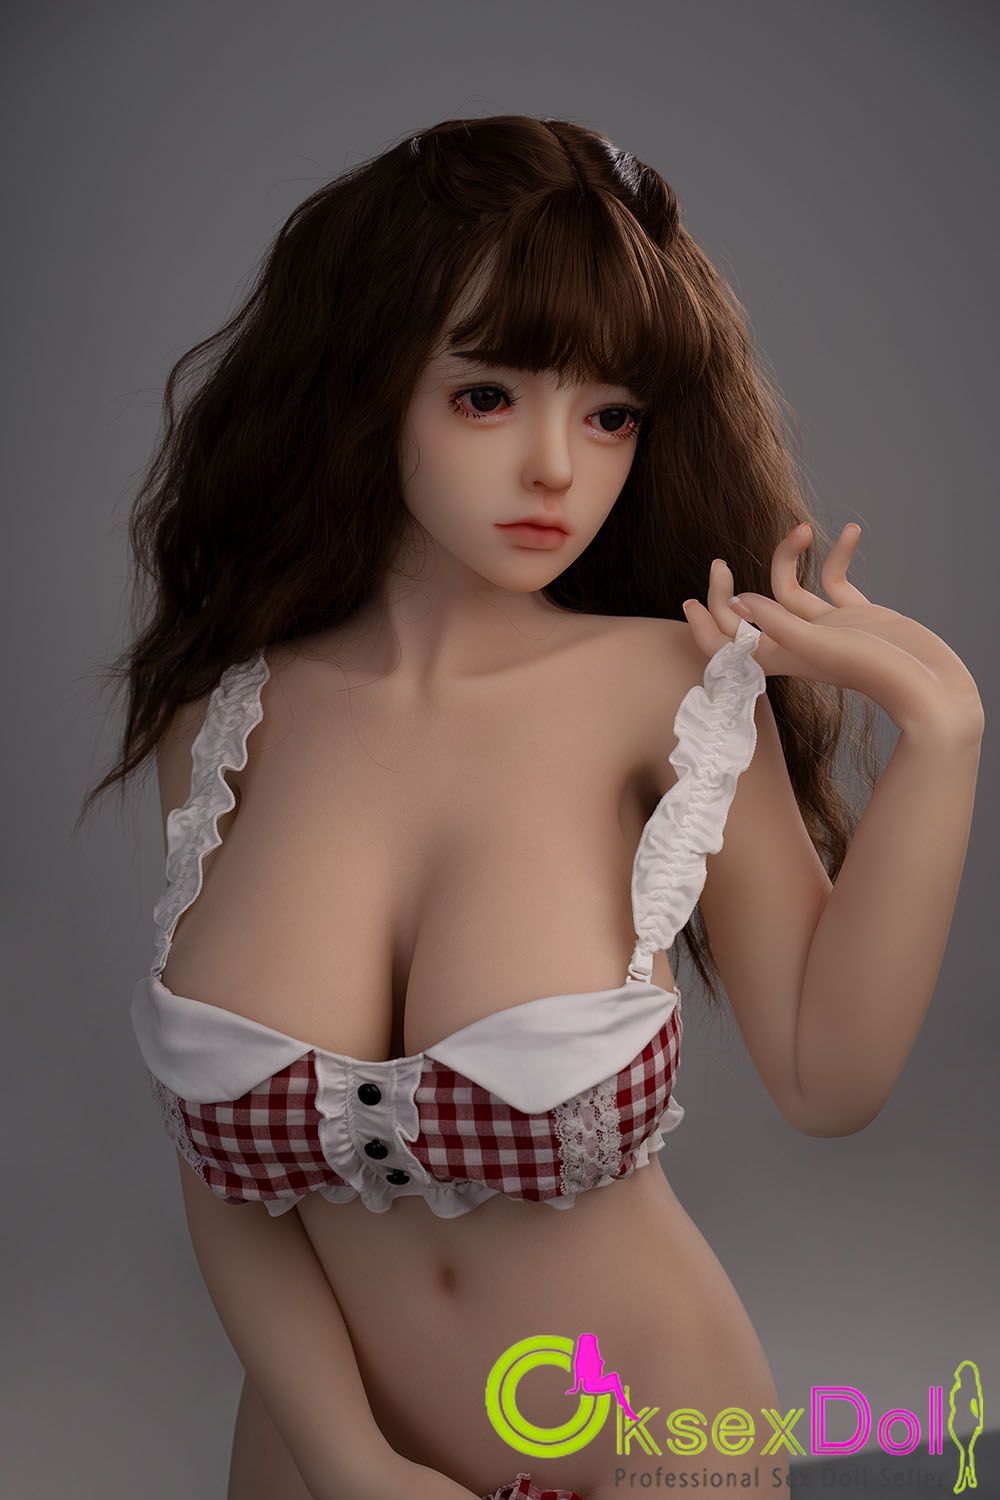 Brown Hair sex dolls images